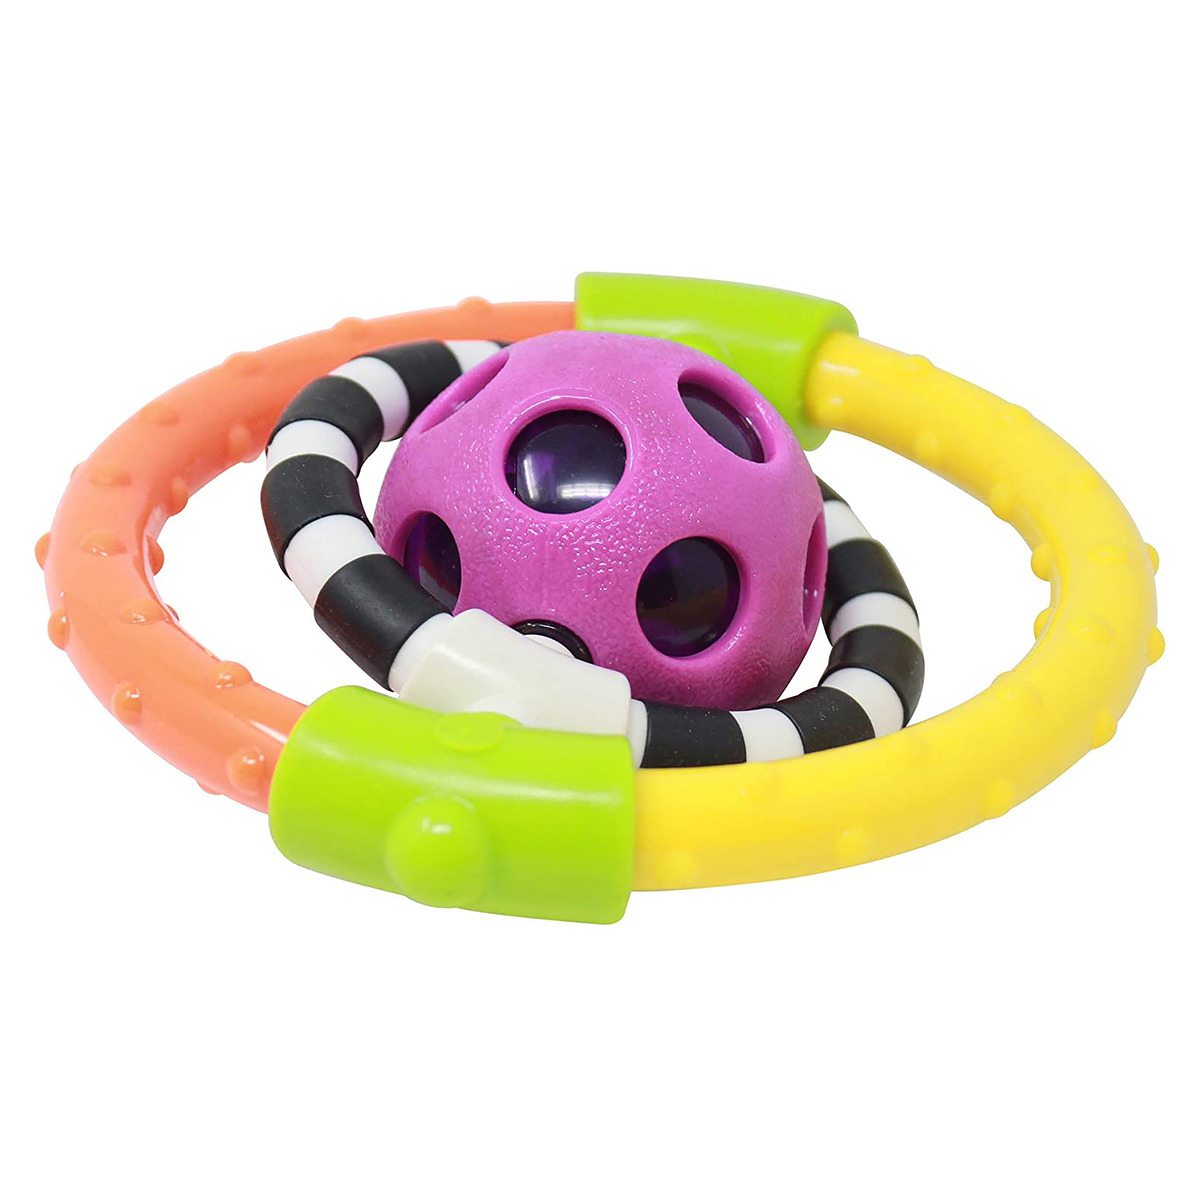 Sassy Spin & Chew Ring Rattle